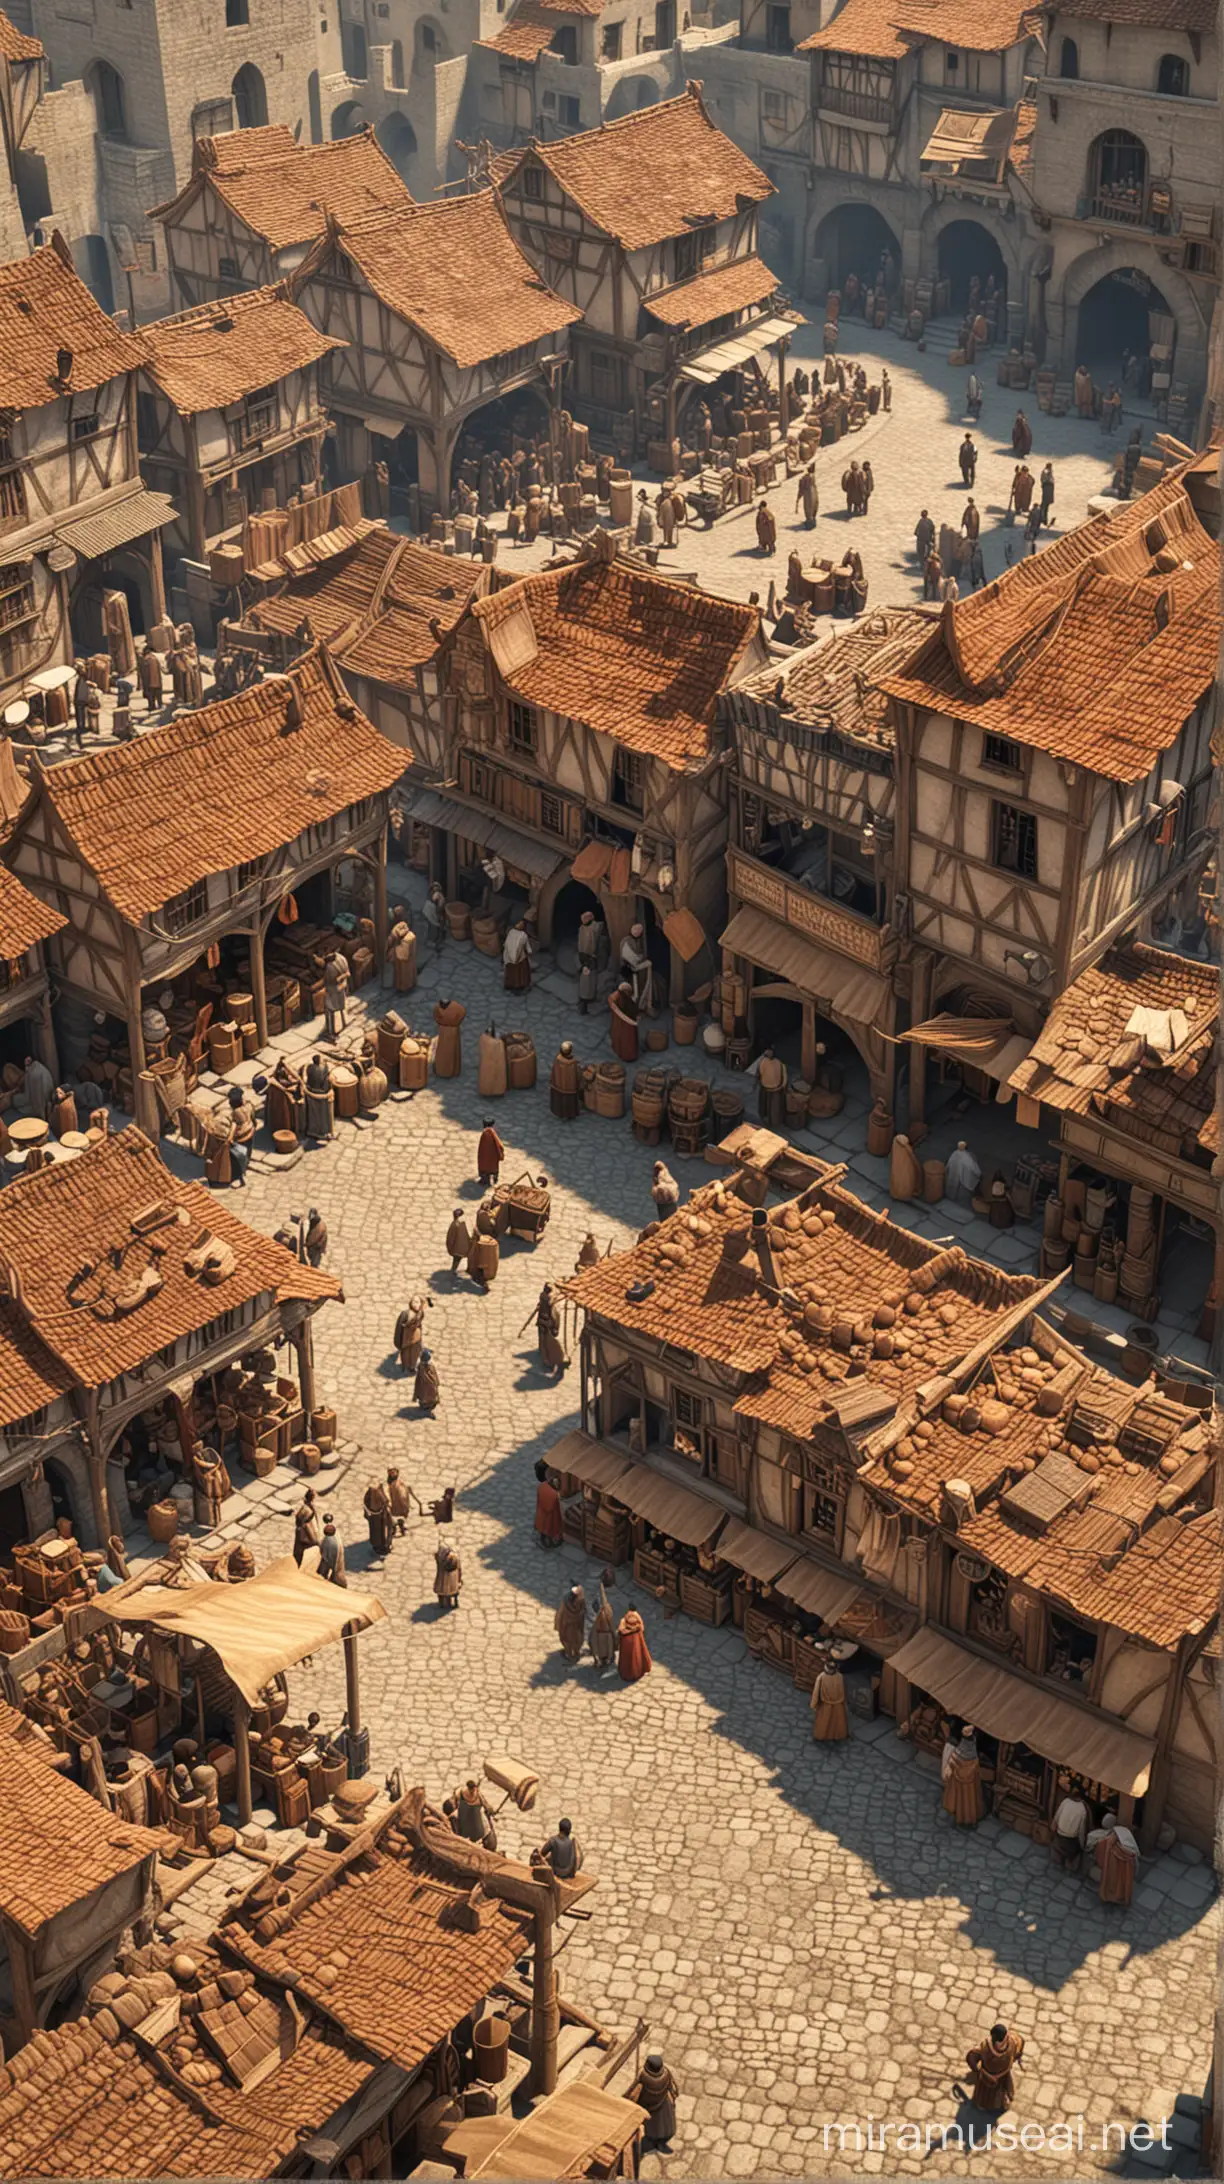 Generate merchants city in 12th century with merchants sell things